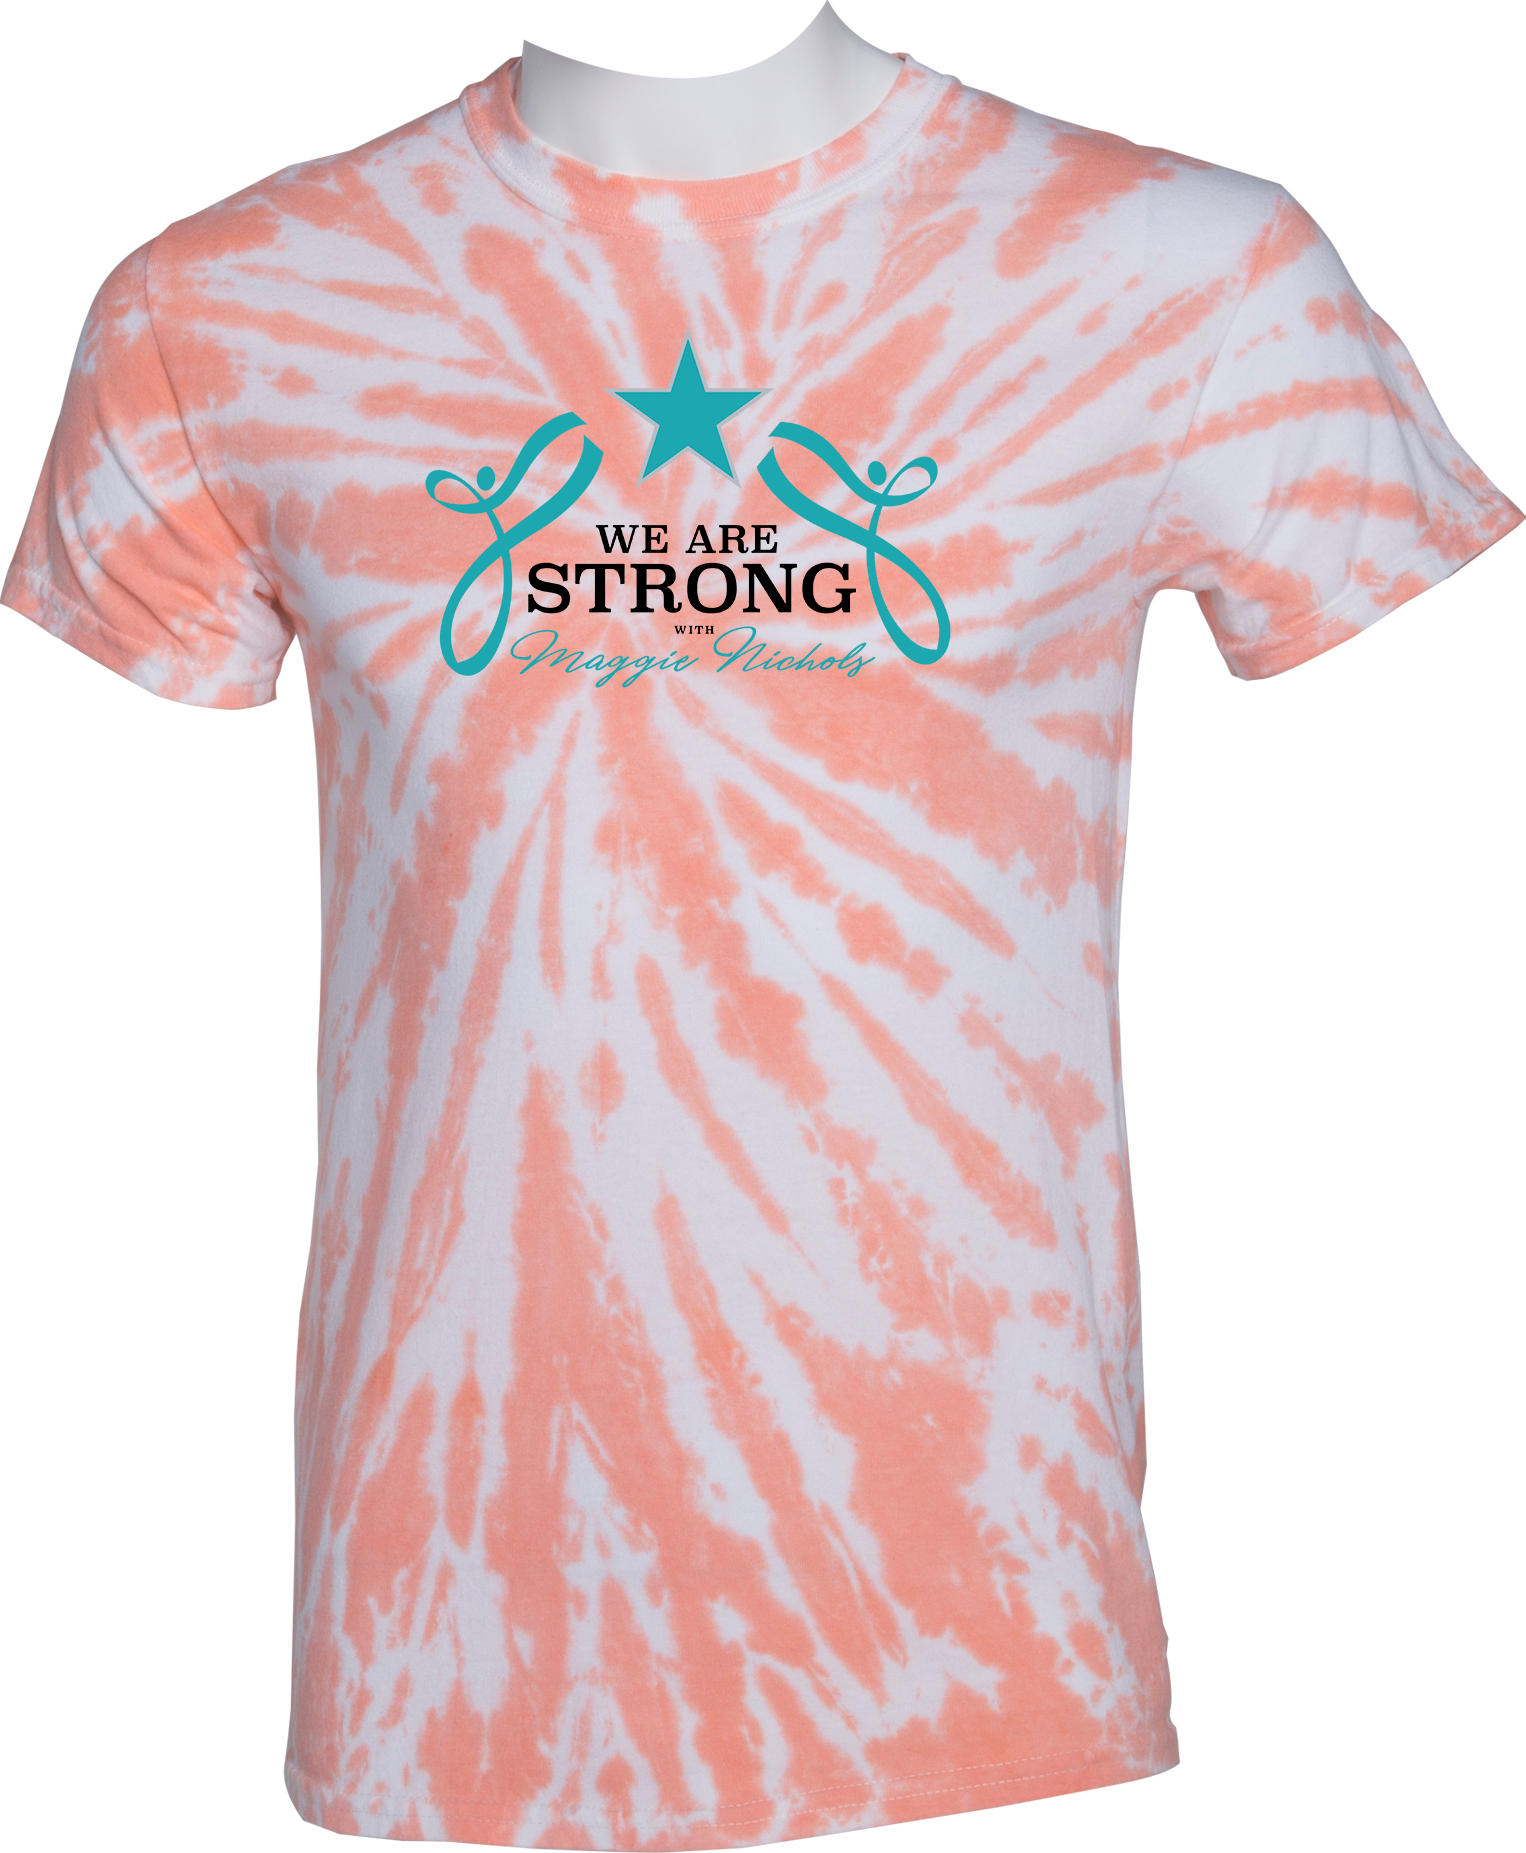 TIE-DYE SHORT SLEEVES - 2023 We Are Strong with Maggie Nichols